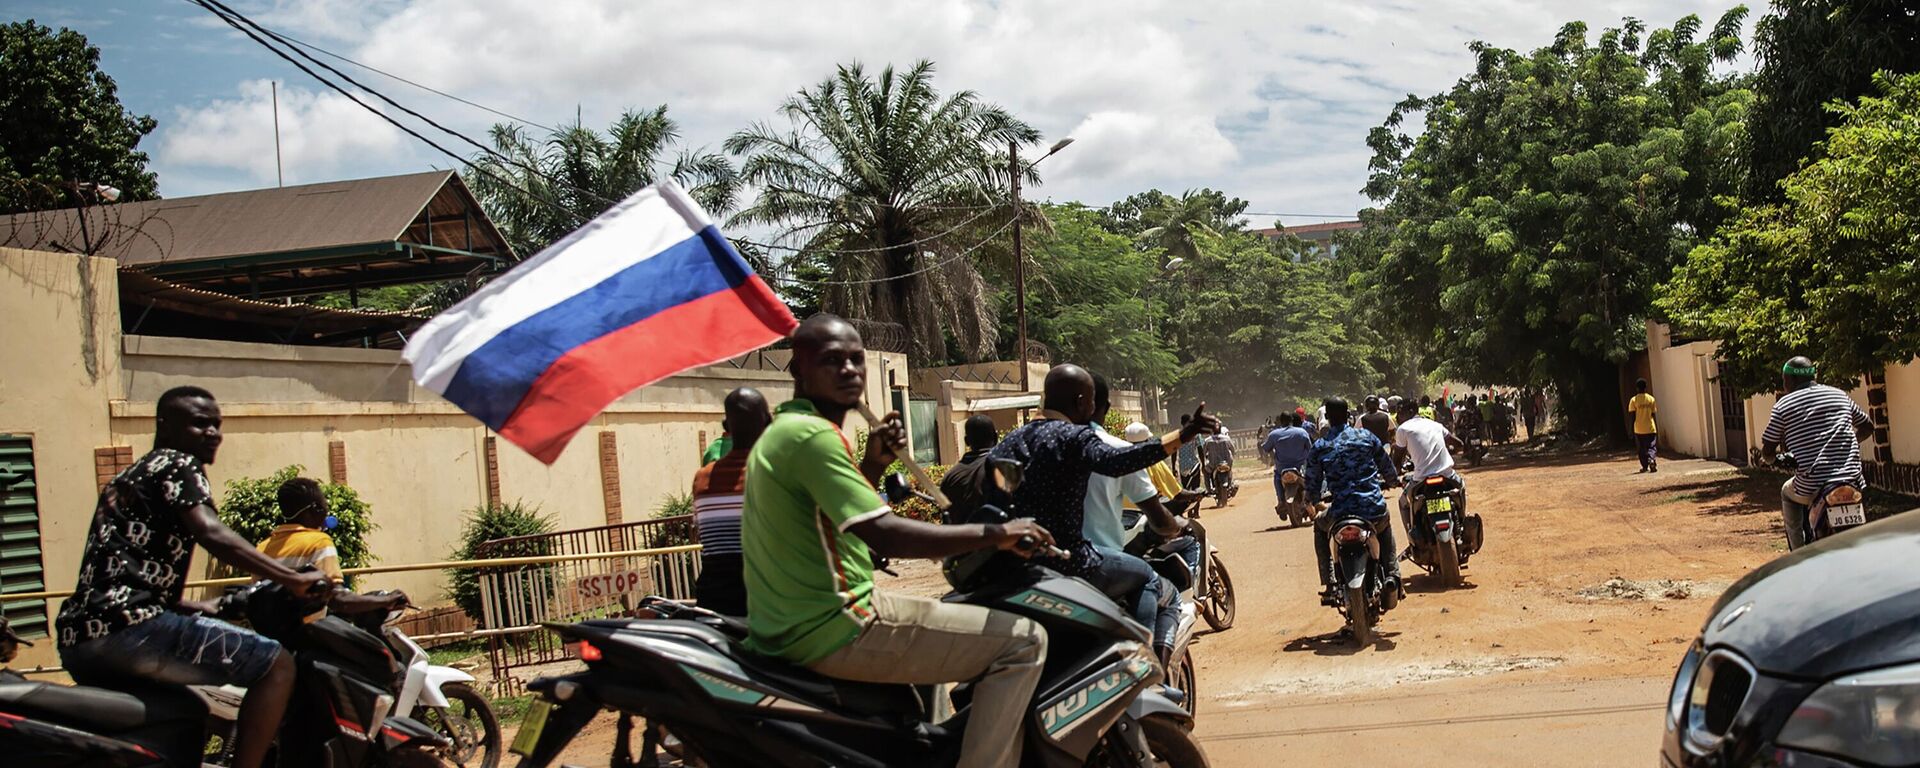 Supporters of Capt. Ibrahim Traore parade waving a Russian flag in the streets of Ouagadougou, Burkina Faso, Sunday, Oct. 2, 2022. Burkina Faso's new junta leadership is calling for calm after the French Embassy and other buildings were attacked. The unrest following the West African nation's second coup this year came after a junta statement alleged that the ousted interim president was at a French military base in Ouagadougou. France vehemently denied the claim and has urged its citizens to stay indoors amid rising anti-French sentiment in the streets. (AP Photo/Sophie Garcia) - Sputnik International, 1920, 04.10.2022